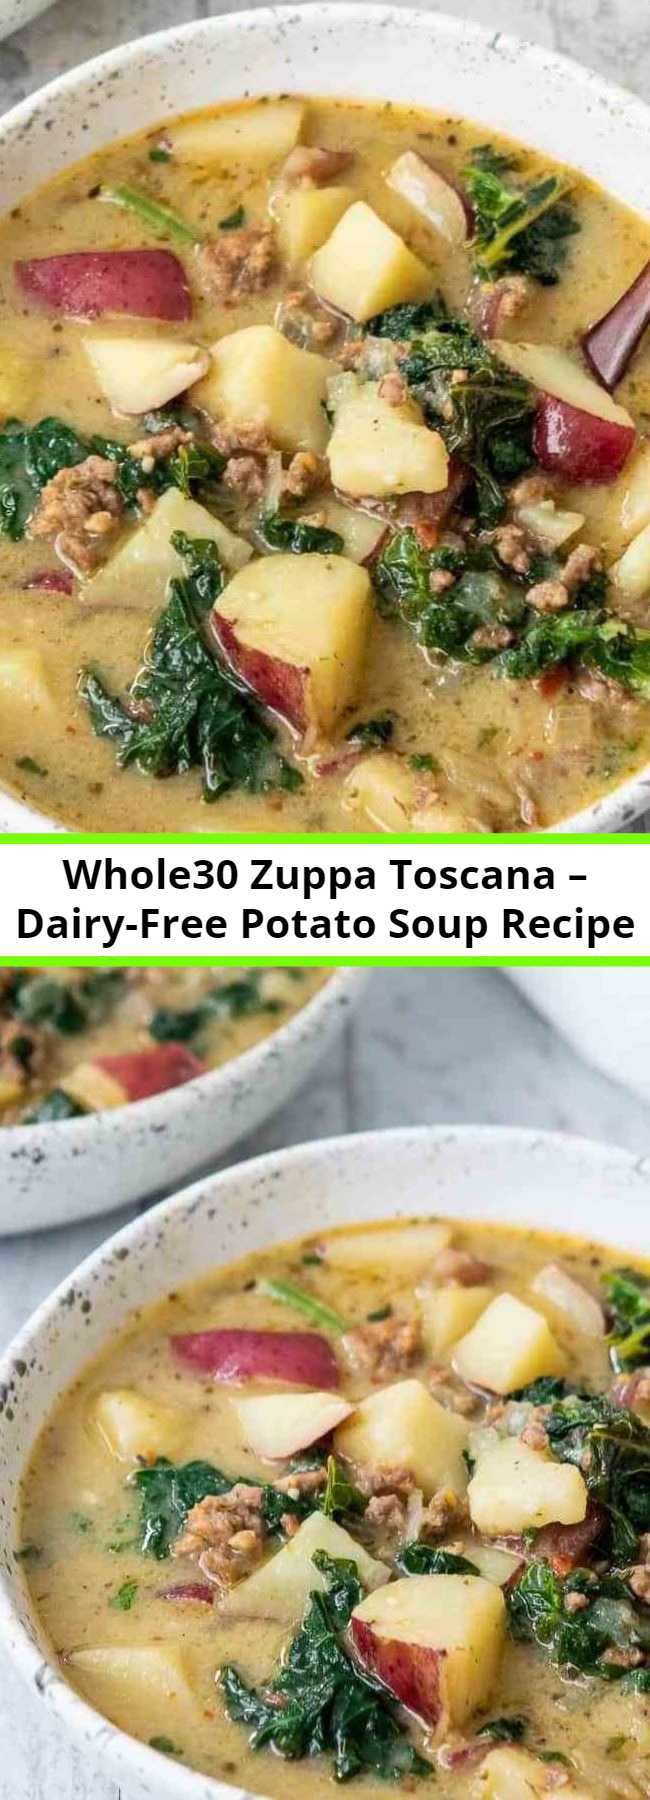 Whole30 Zuppa Toscana – Dairy-Free Potato Soup Recipe - Cozy up to this Whole30 Zuppa Toscana tonight! Packed with potatoes, sausage and fresh crunchy kale swimming in a lightly spiced broth, you’ll think you’re at Olive Garden (minus the guilt)! You’ll fall in love with this healthy, dairy-free, gluten-free Olive Garden Zuppa Toscana copycat recipe once you give it a try.